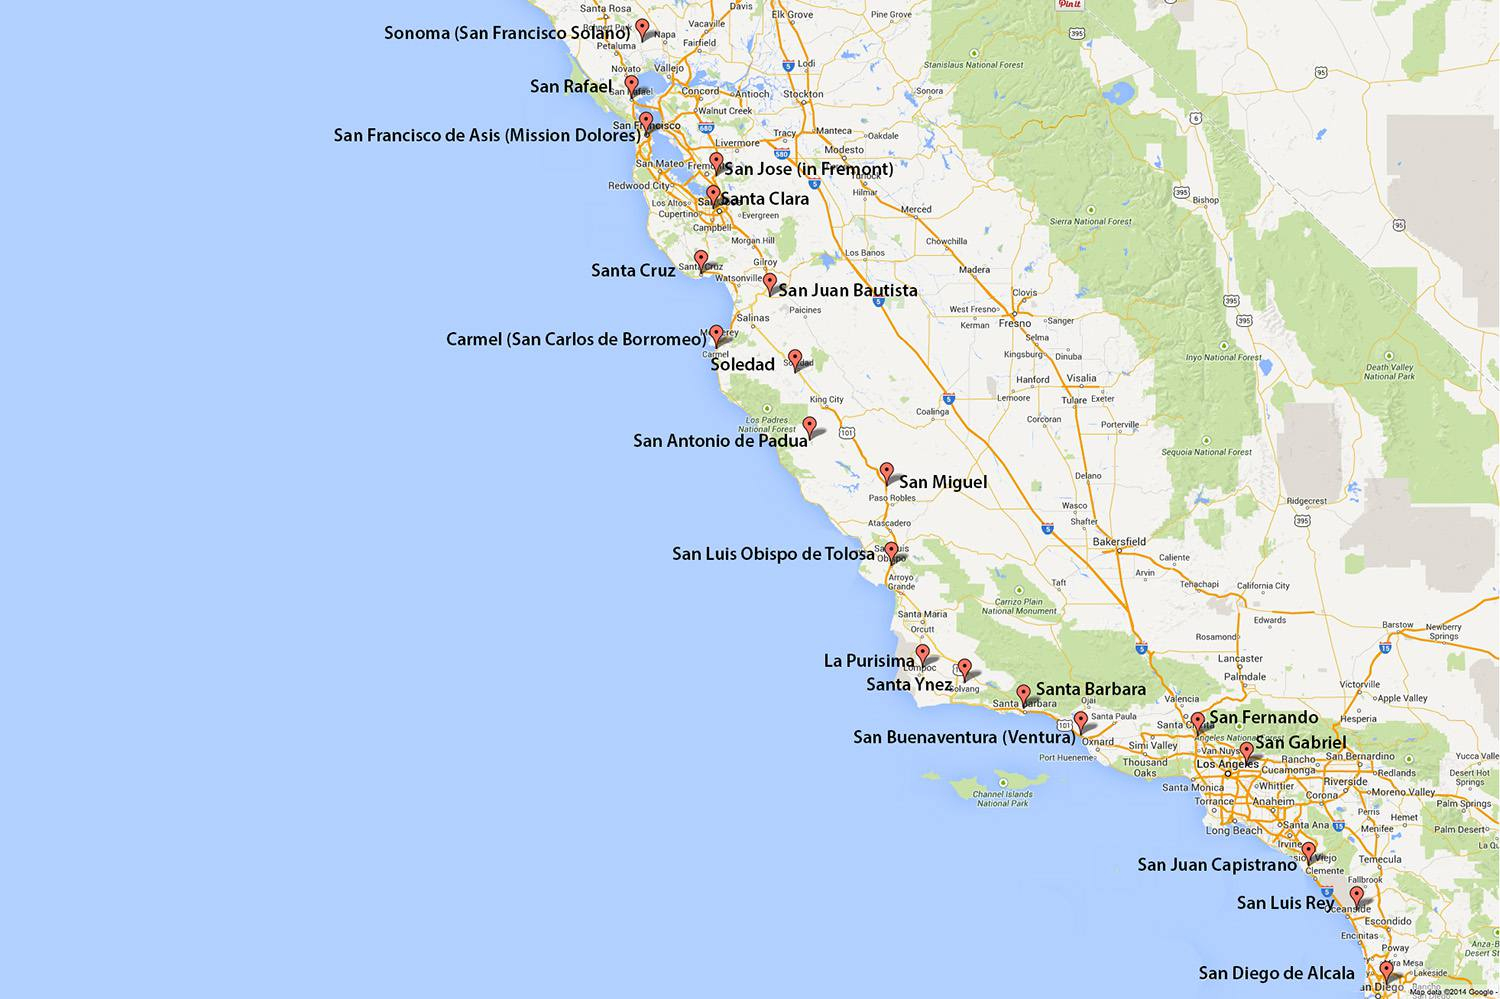 California Missions Map: Where To Find Them - California Missions Map For Kids